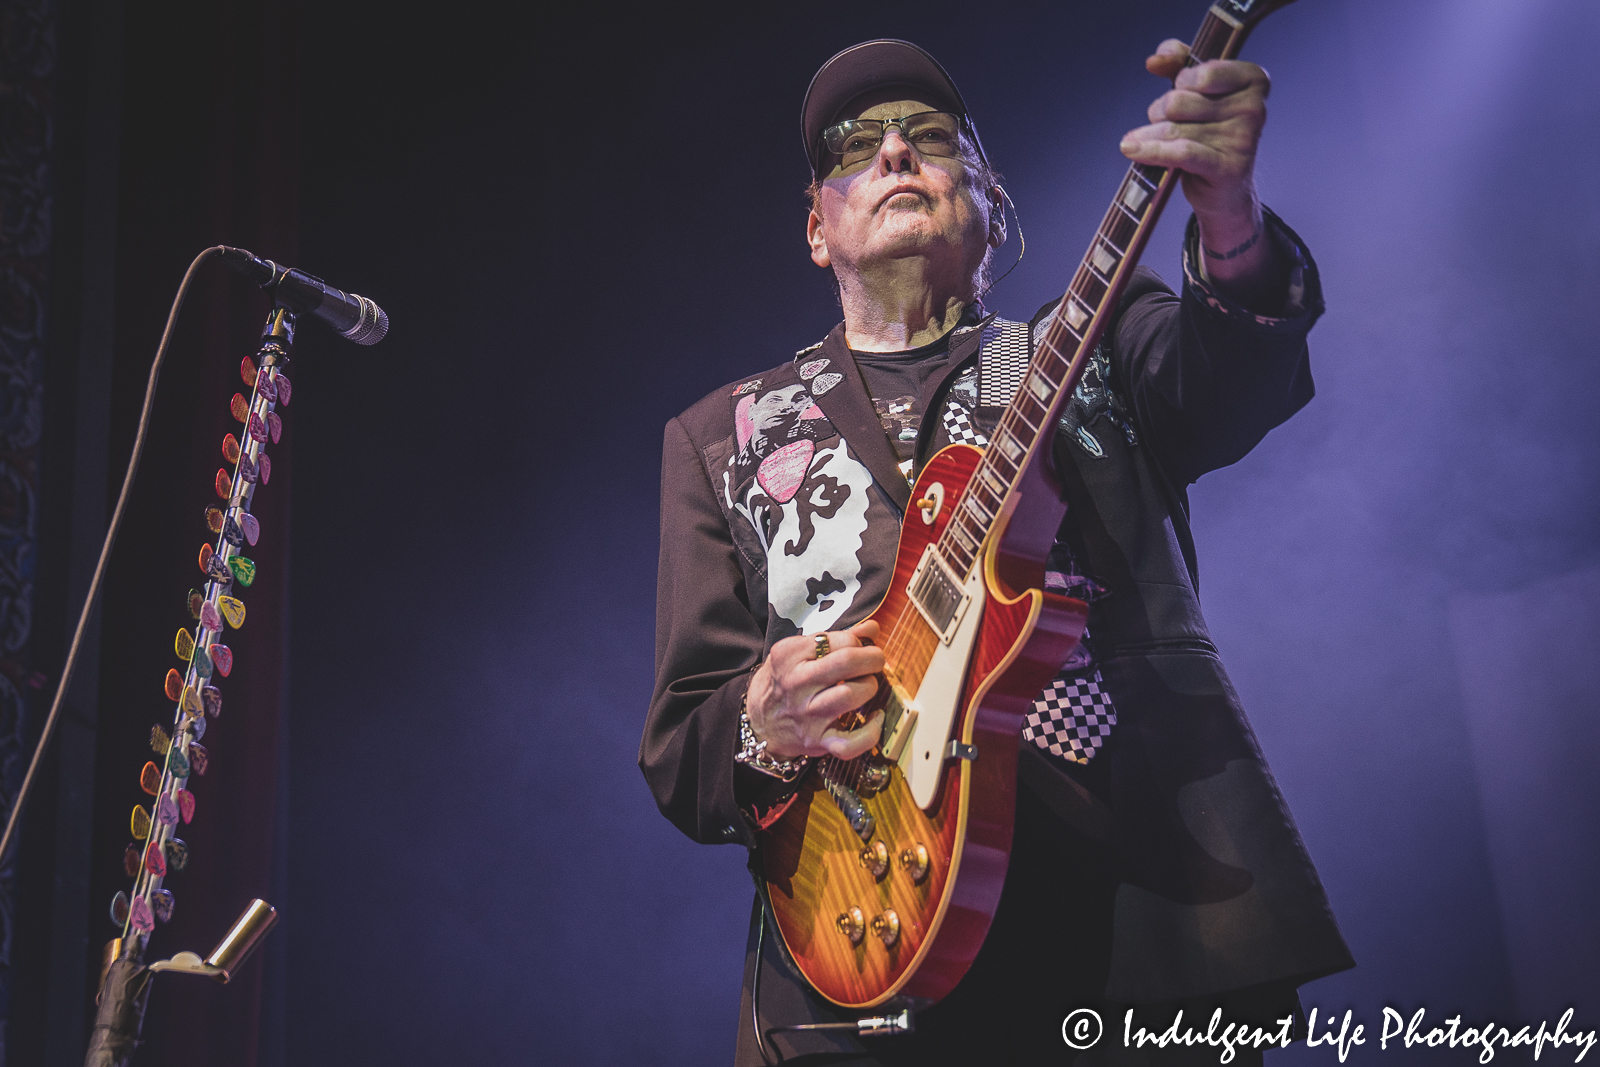 Cheap Trick founding member and guitarist Rick Nielsen playing live at Uptown Theater in Kansas City, MO on September 13, 2022.